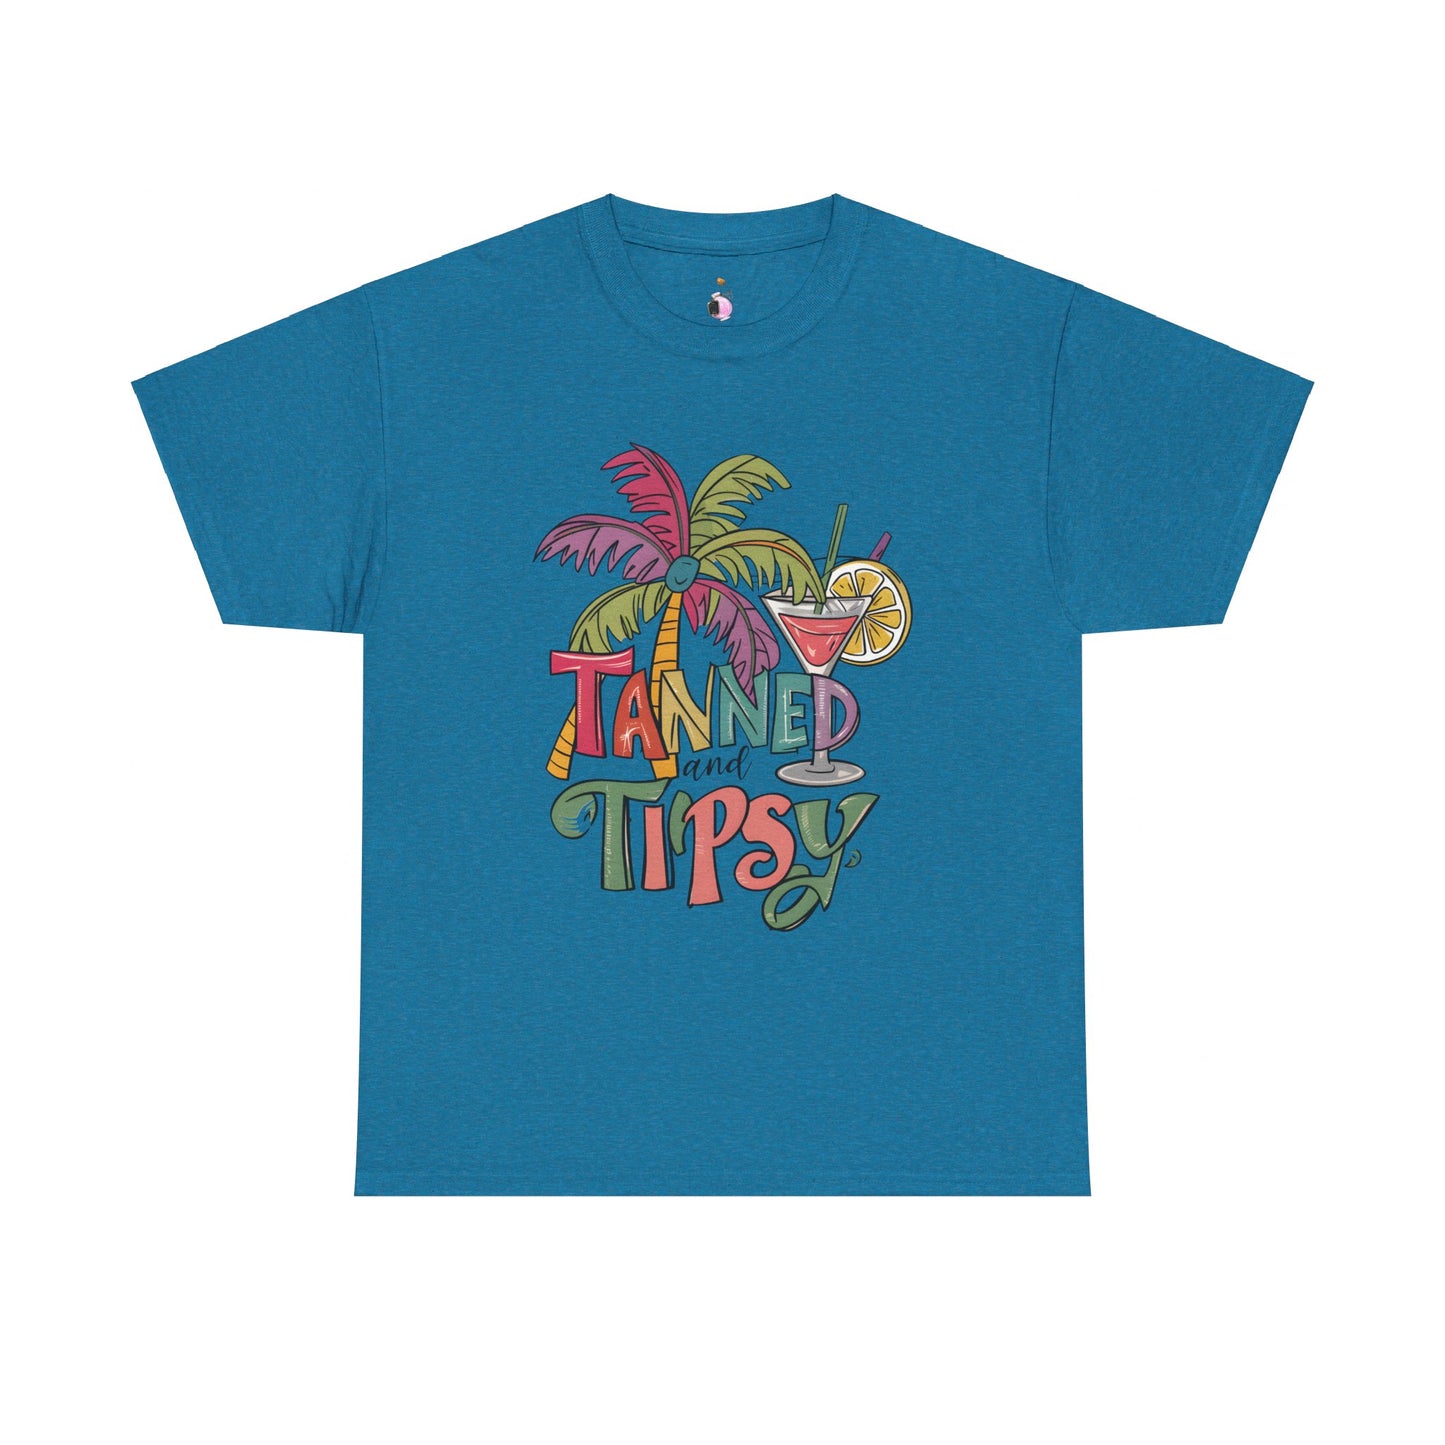 Tanned & Tipsy - Unisex Heavy Cotton Tee